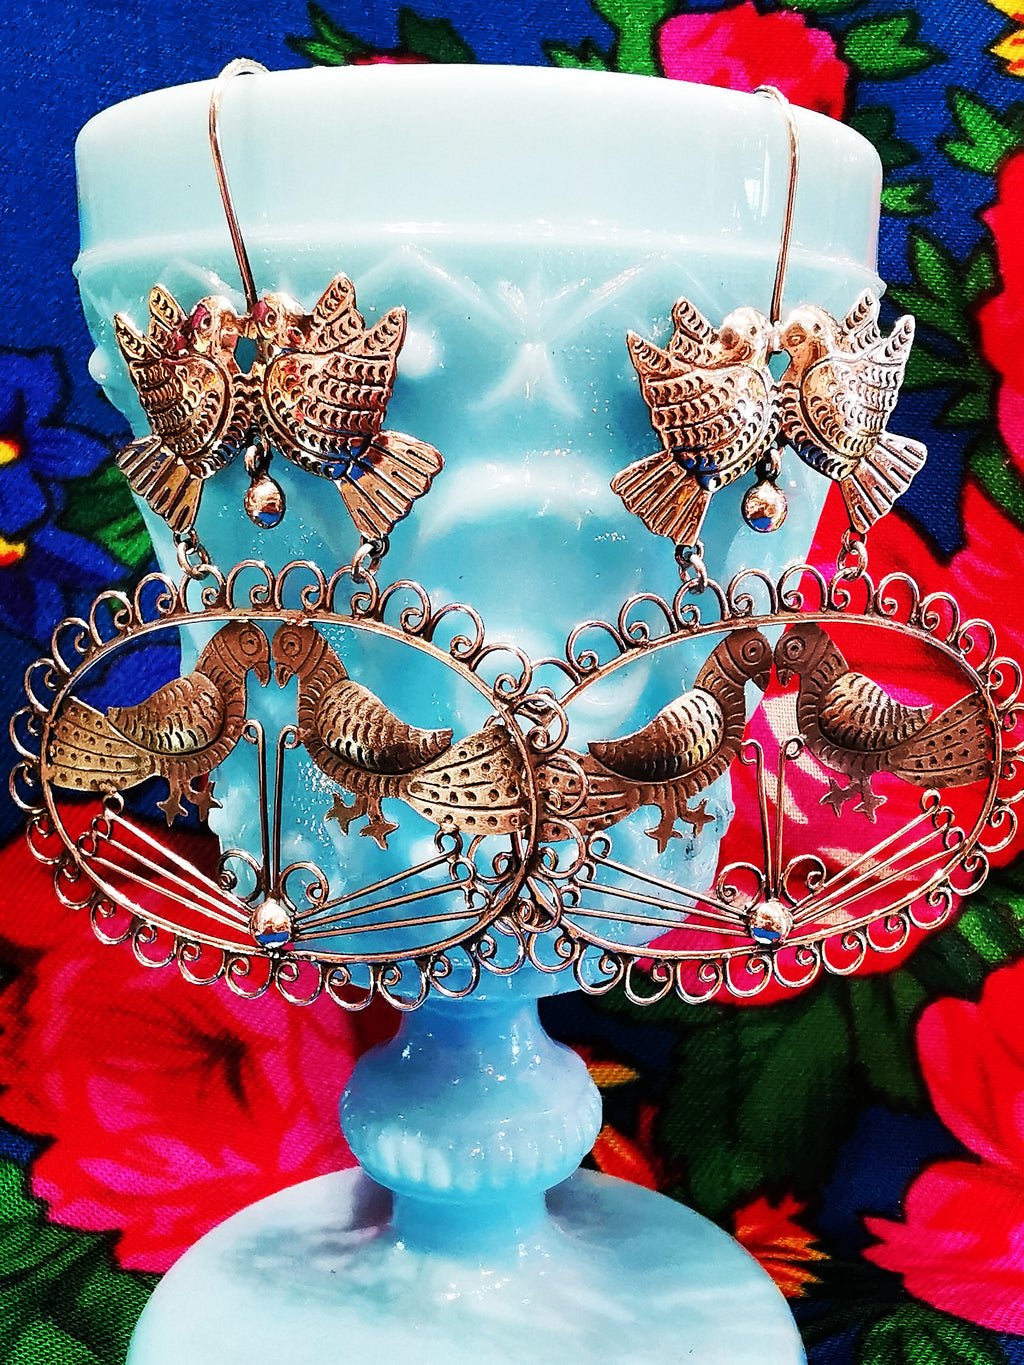 Gorgeous huge Mexican filigree silver earrings with lovebirds for eternal devotion, a traditional Oaxaca design, all hand made in Mexico

925 sterling silver

7cm x 5.5cm

